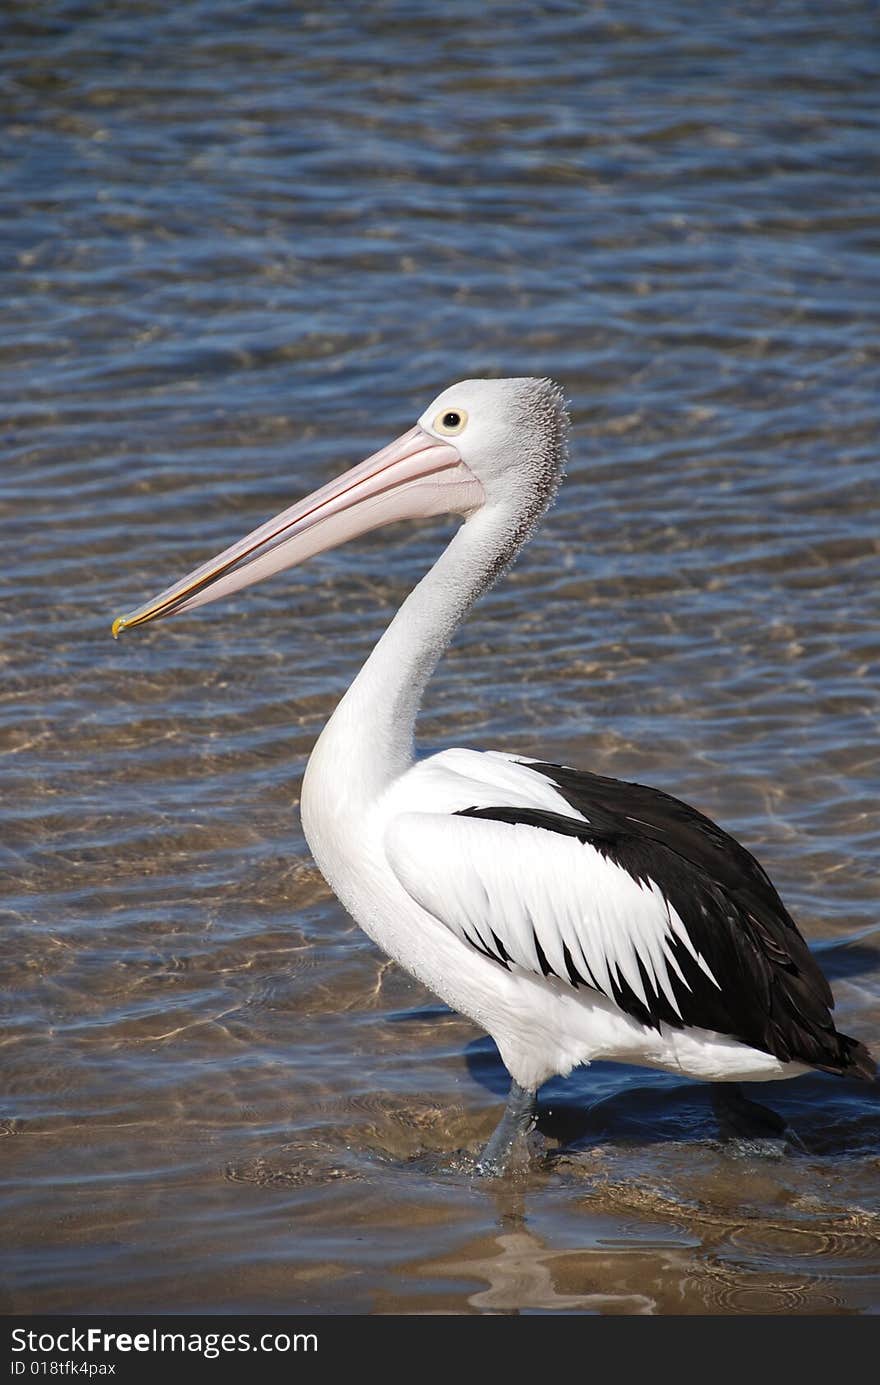 Pelican stands in shallow water on the Australian coast. Pelican stands in shallow water on the Australian coast